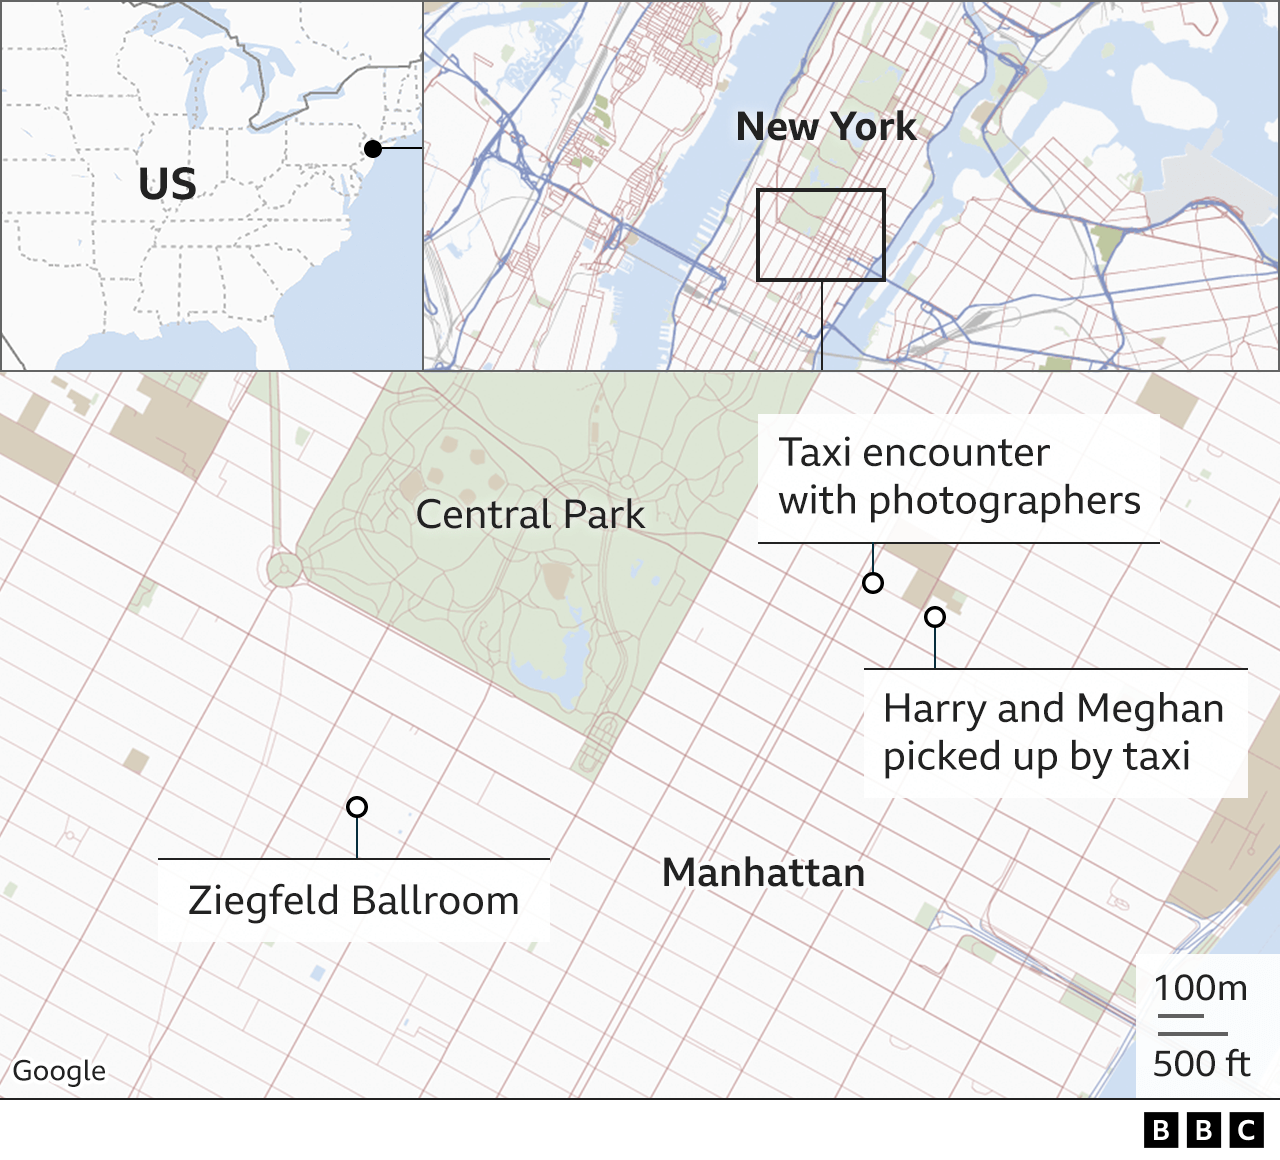 Map of Manhattan showing some key locations from the incident including Ziegfeld Ballroom, where Harry and Meghan got in the taxi and where the taxi was spotted by photographers